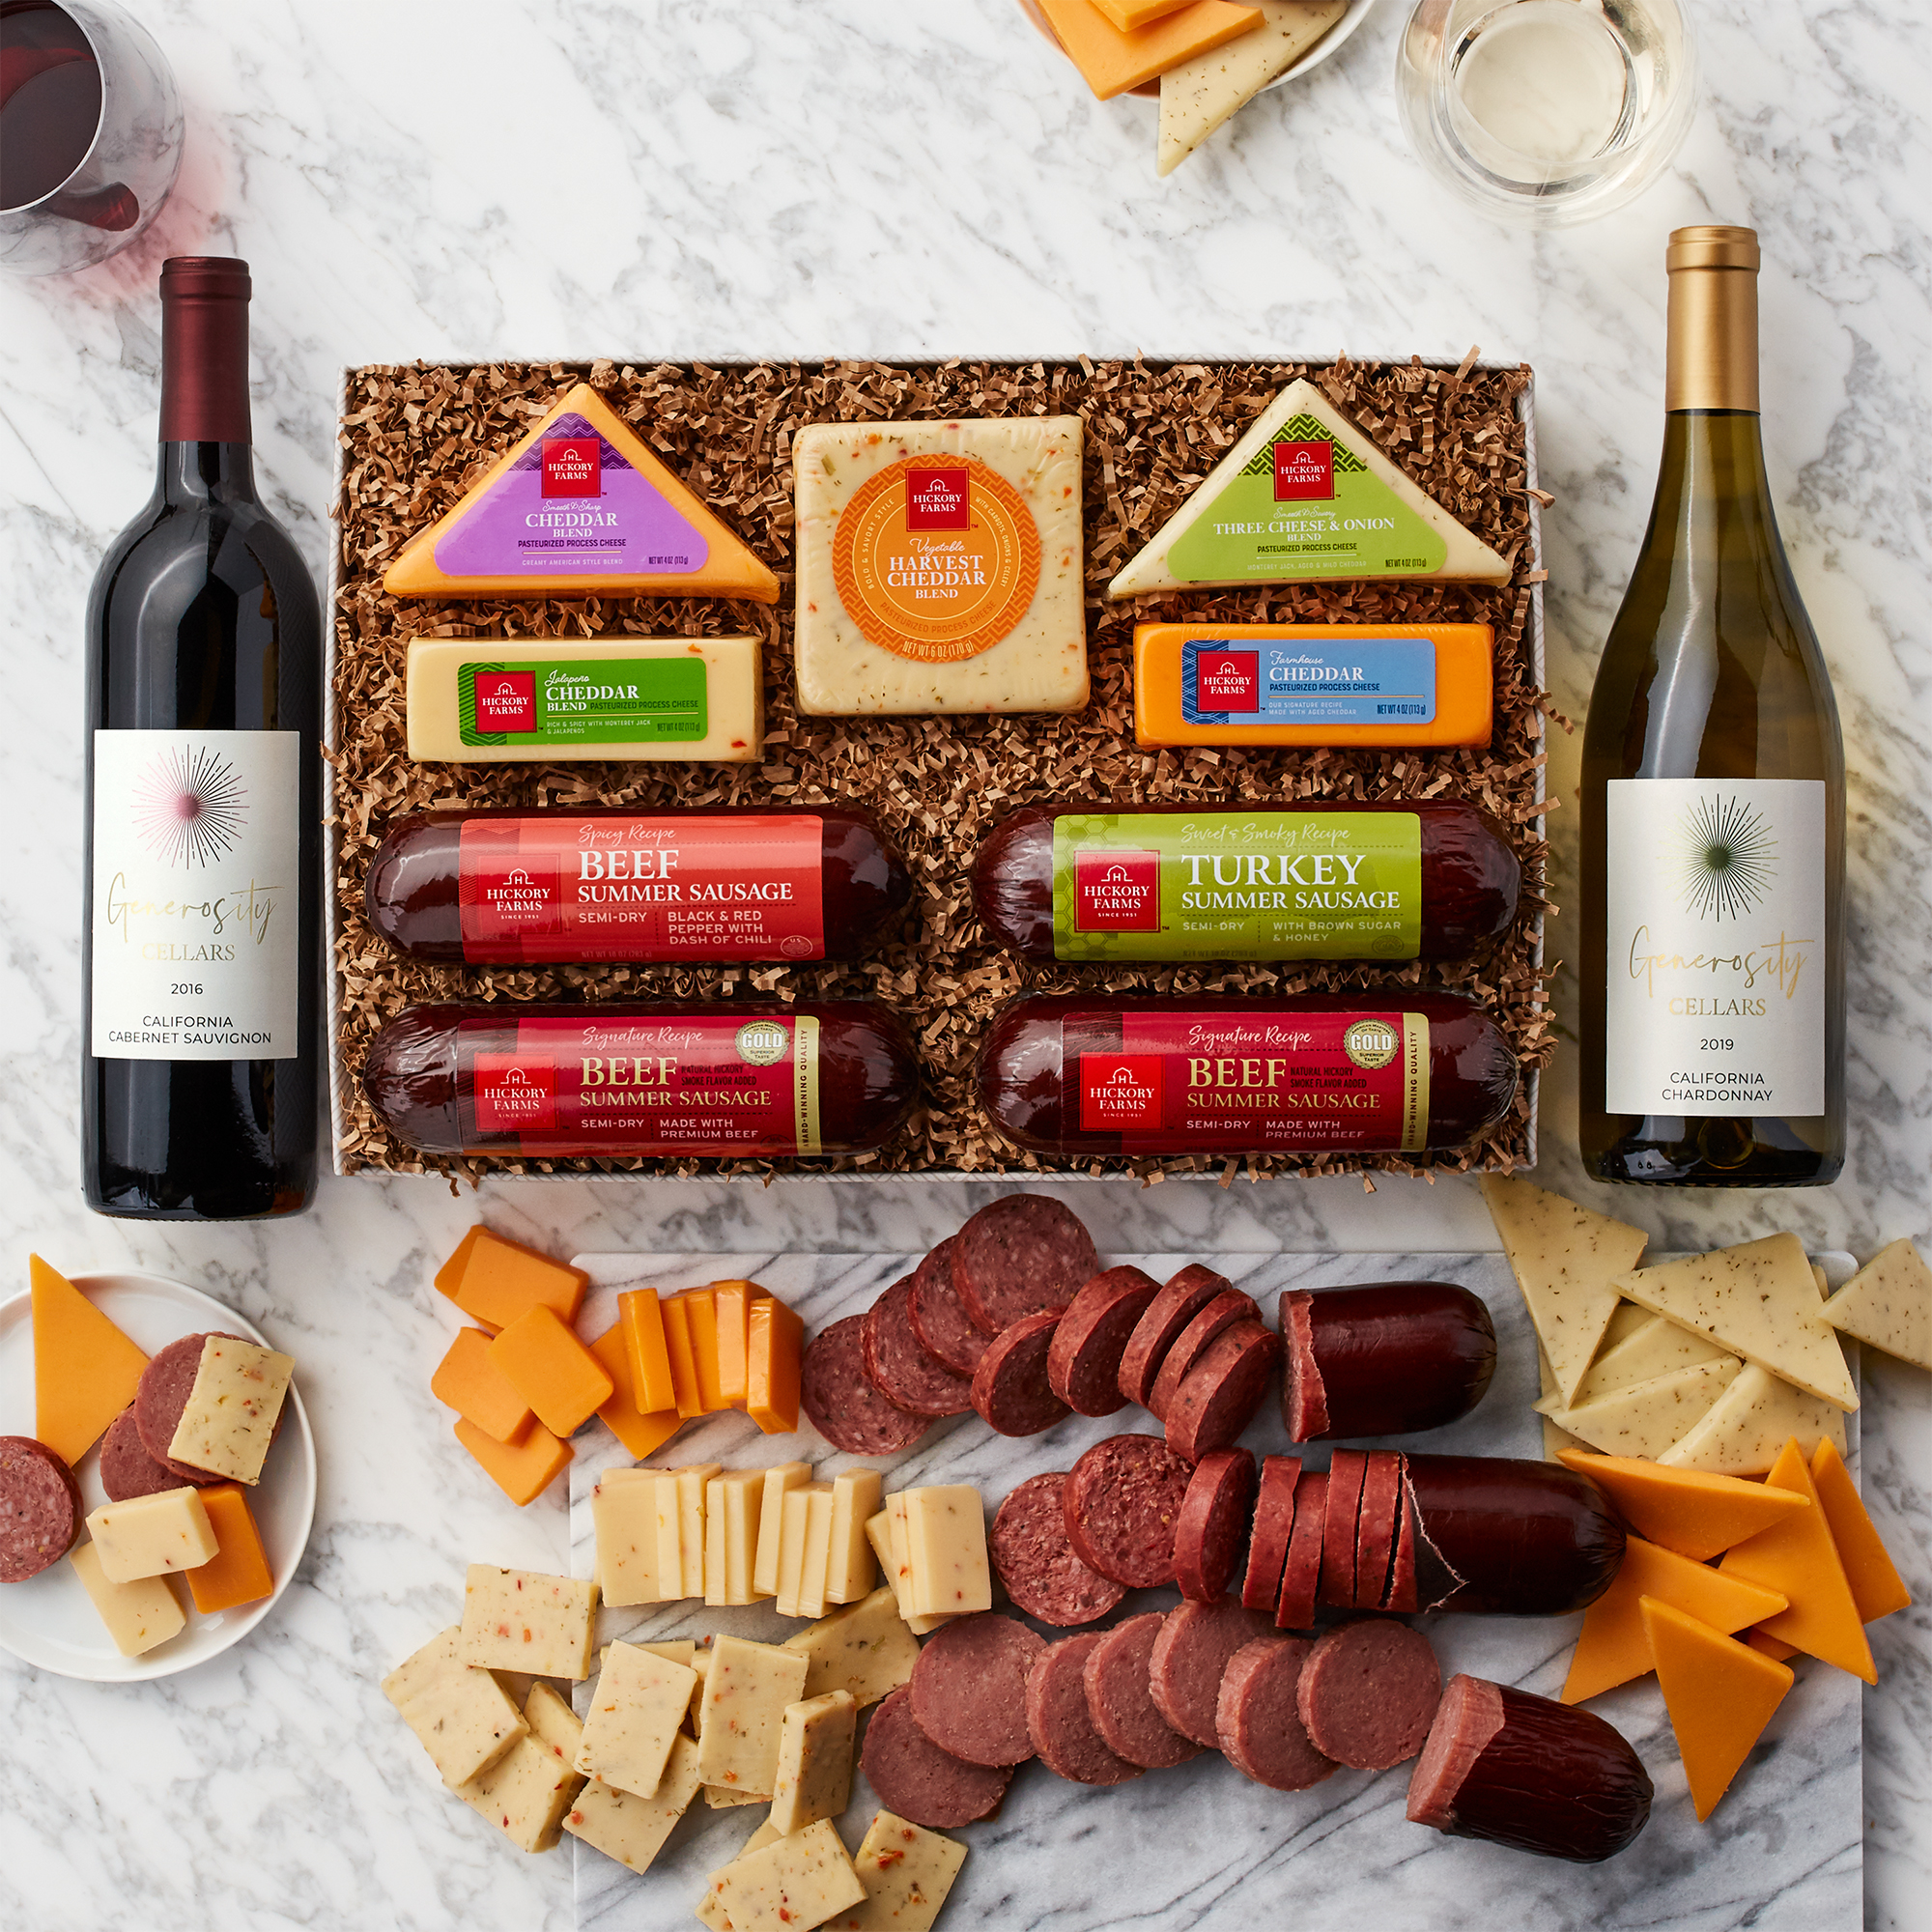 https://www.hickoryfarms.com/on/demandware.static/-/Sites-Web-Master-Catalog/default/dw5ec00e77/images/products/cheese-and-sausage-lovers-wine-gift-set-000822-1.jpg